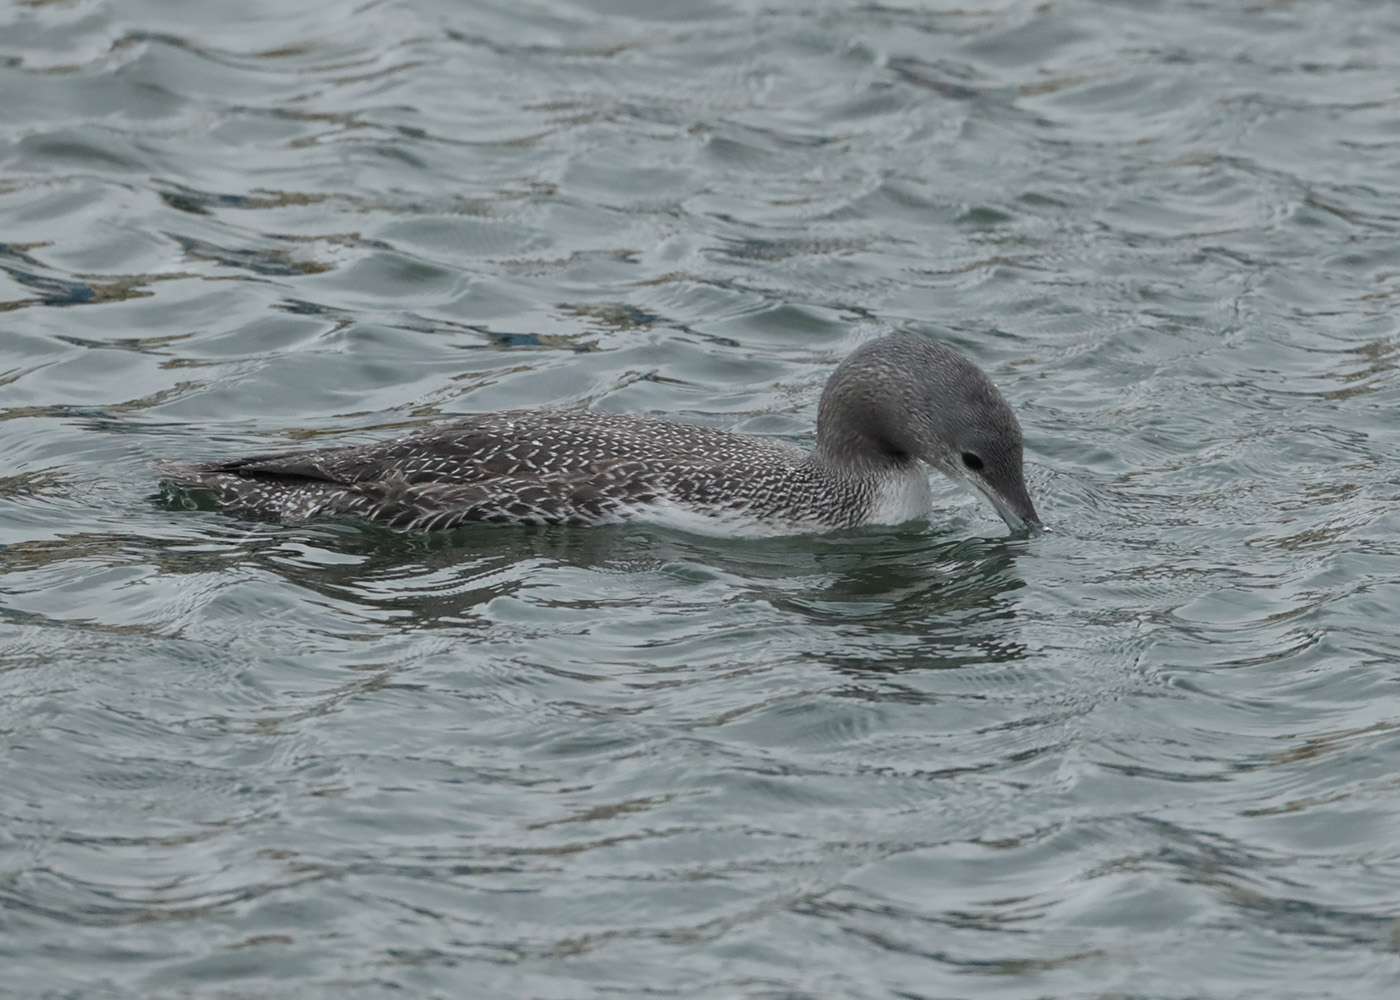 Red-throated Diver by Steve Hopper at Paignton Harbour